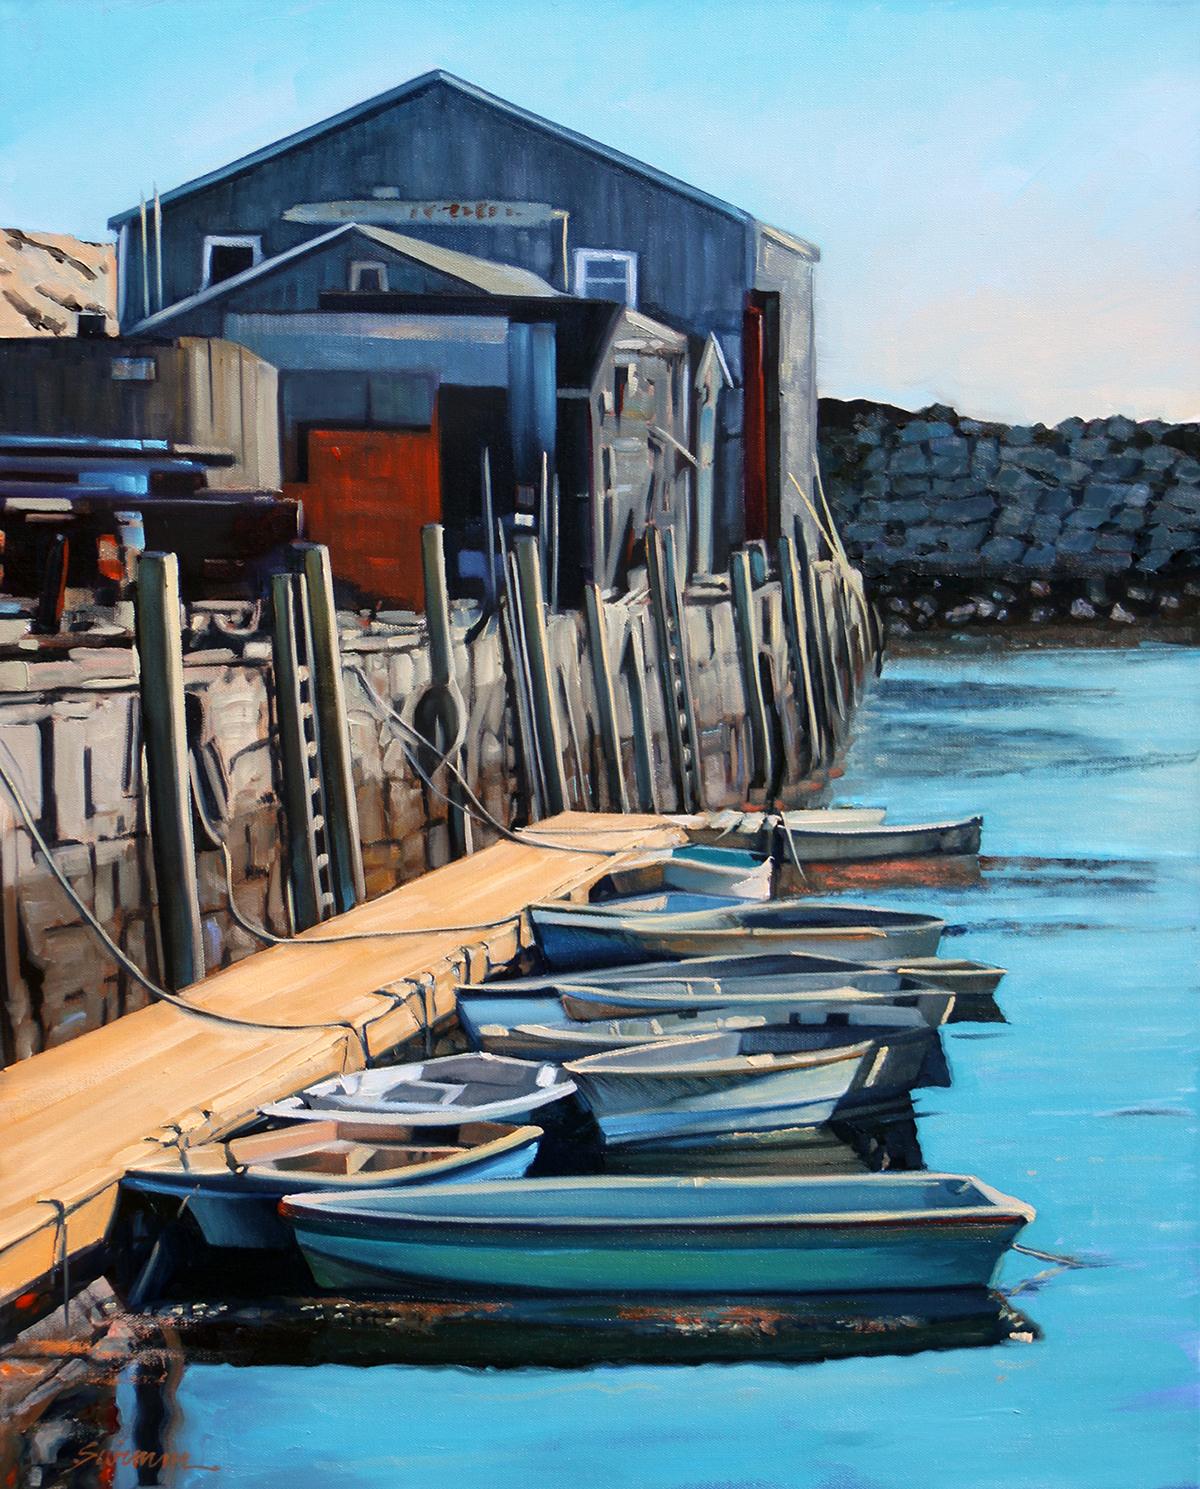 Tom Swimm Landscape Painting - "Perfect Autumn Day"  Wooden Boats Tied Up With Glowing Water Reflections